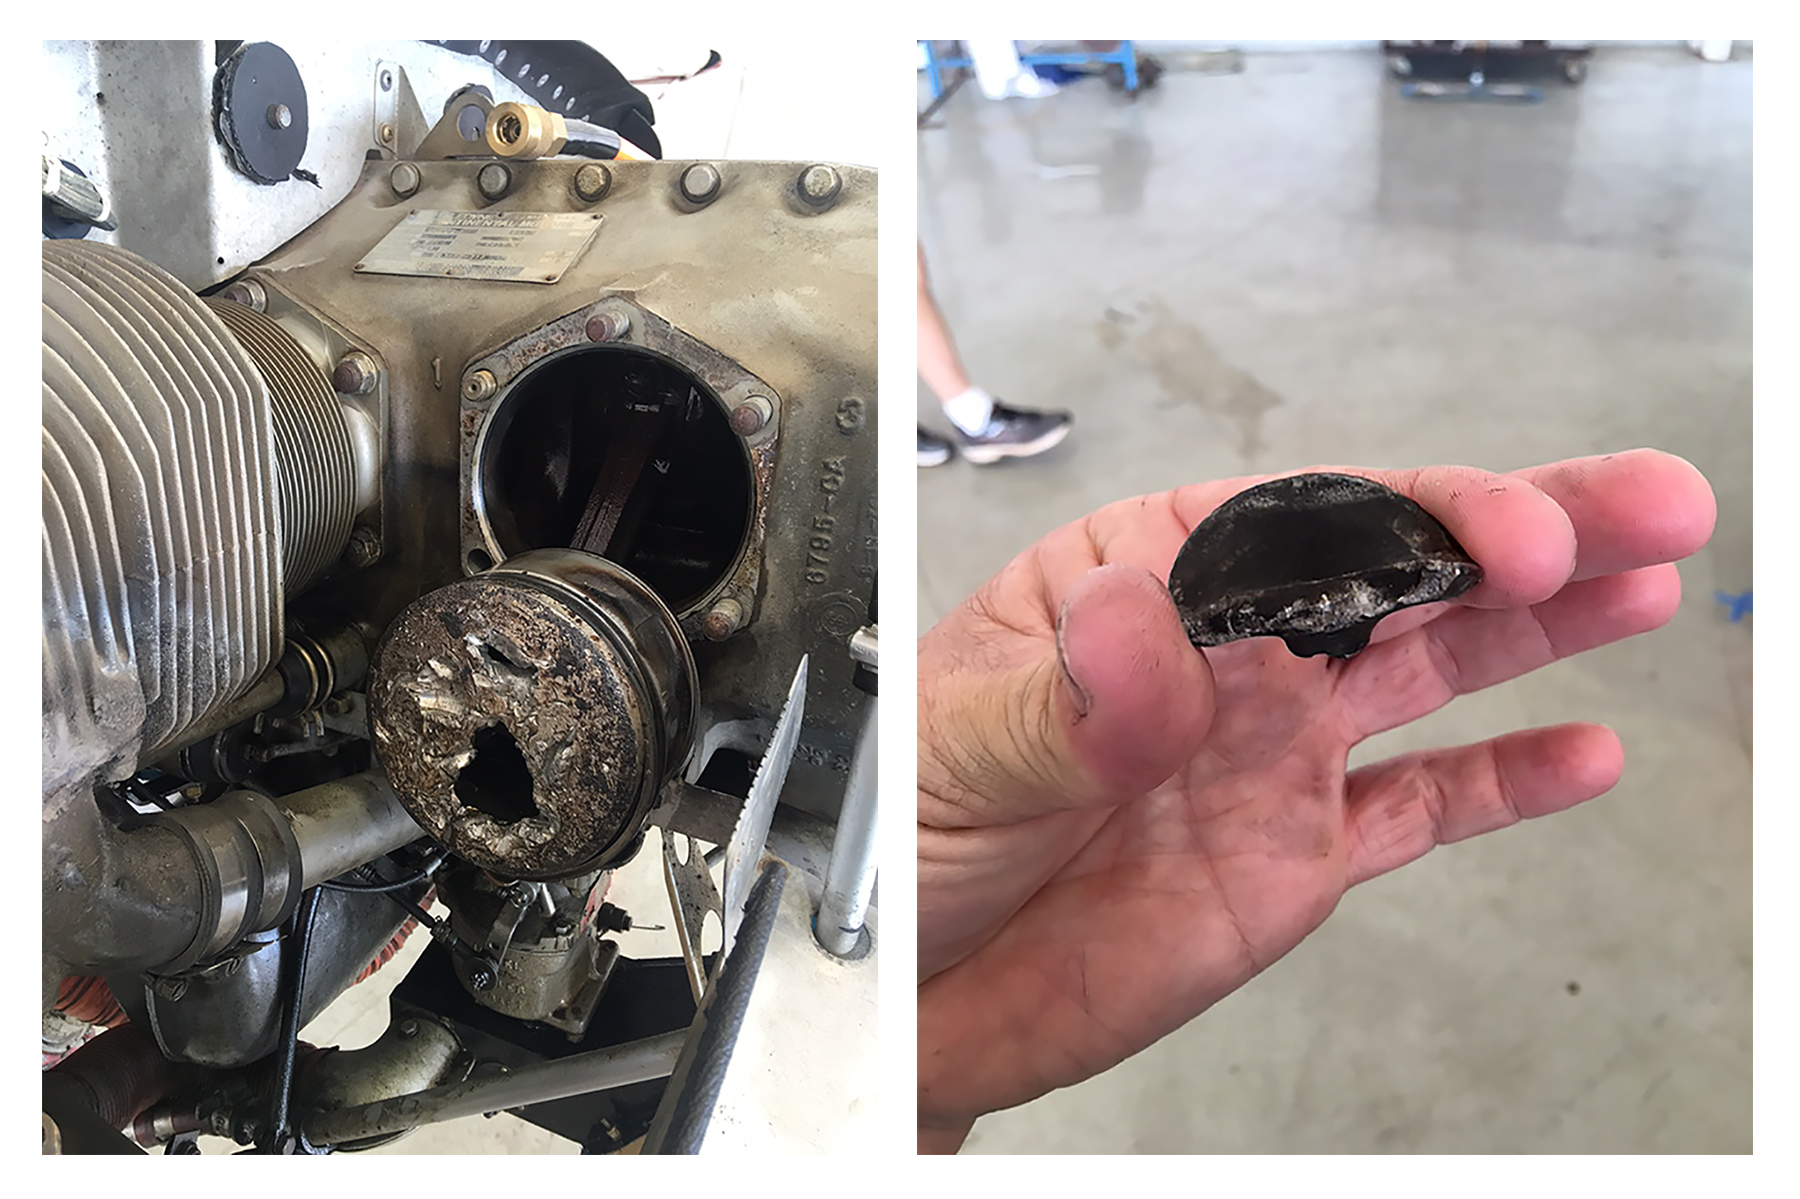 According to Kevin Lund, the piston from a Continental engine mounted on a Cessna 150 that was flown by his daughter Sierra shows damage from a broken intake valve. Photo courtesy of Kevin Lund.